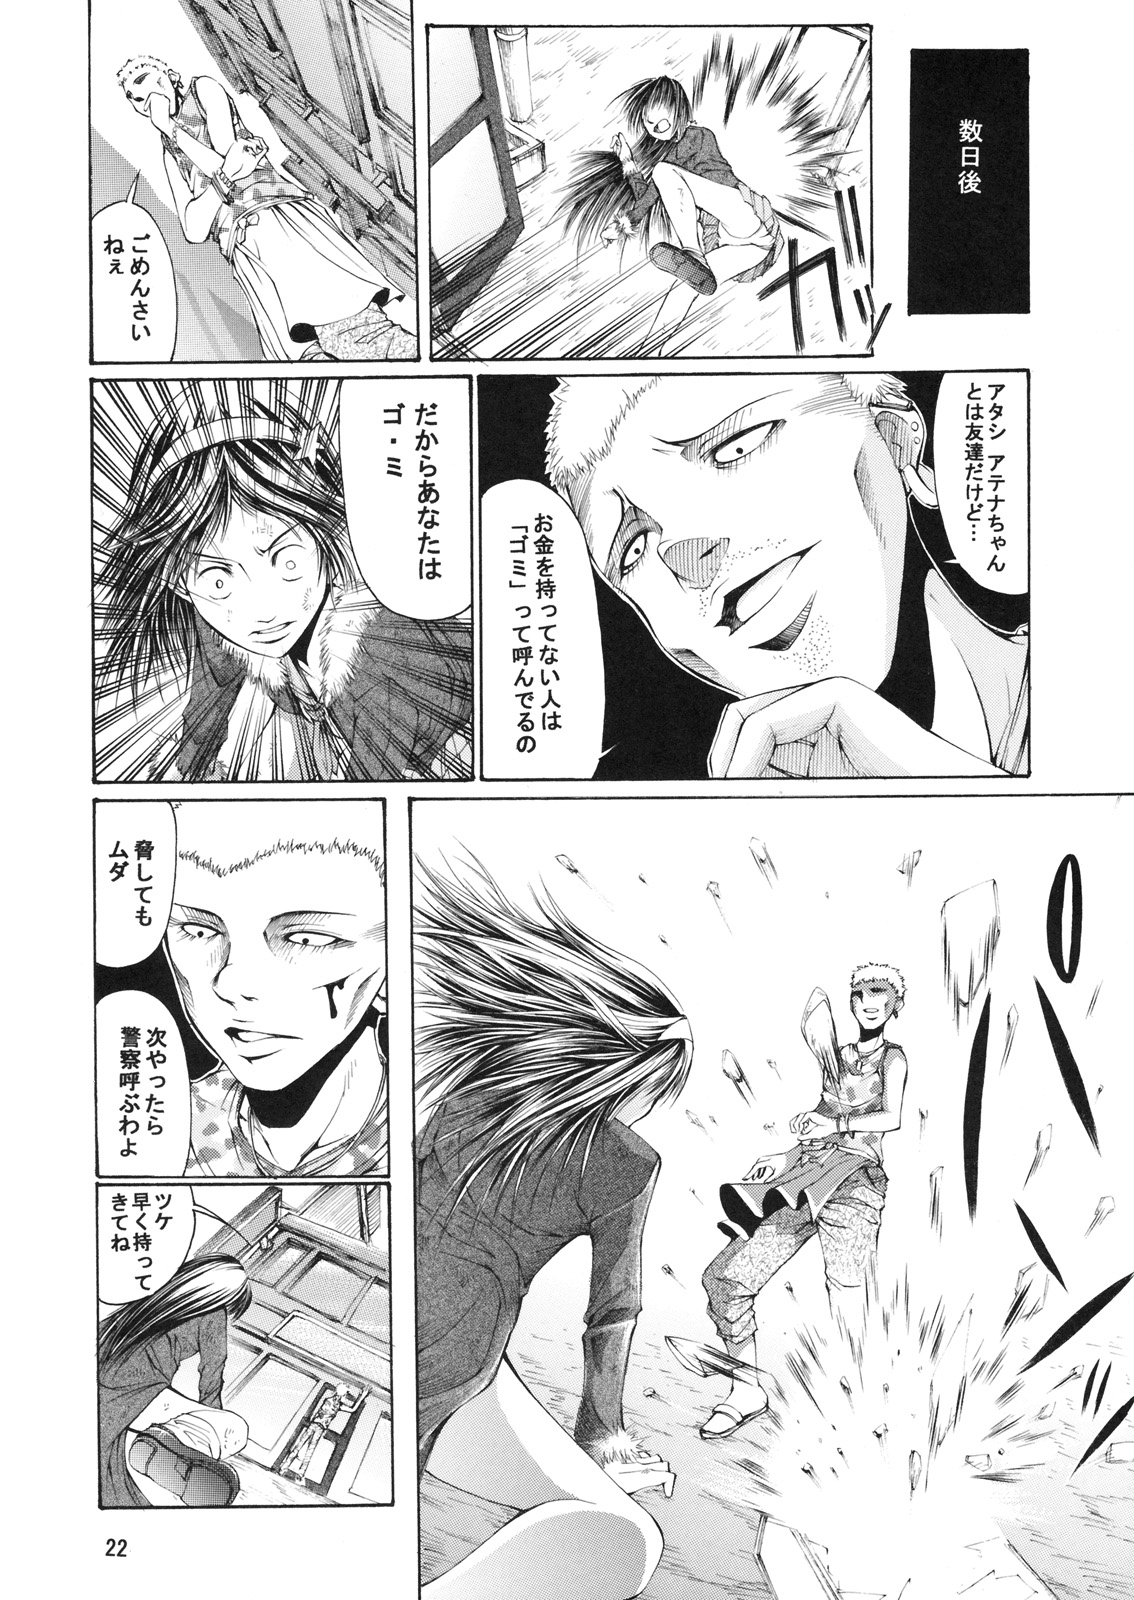 [3g (Junkie)] DOF Mai (King of Fighters) page 21 full